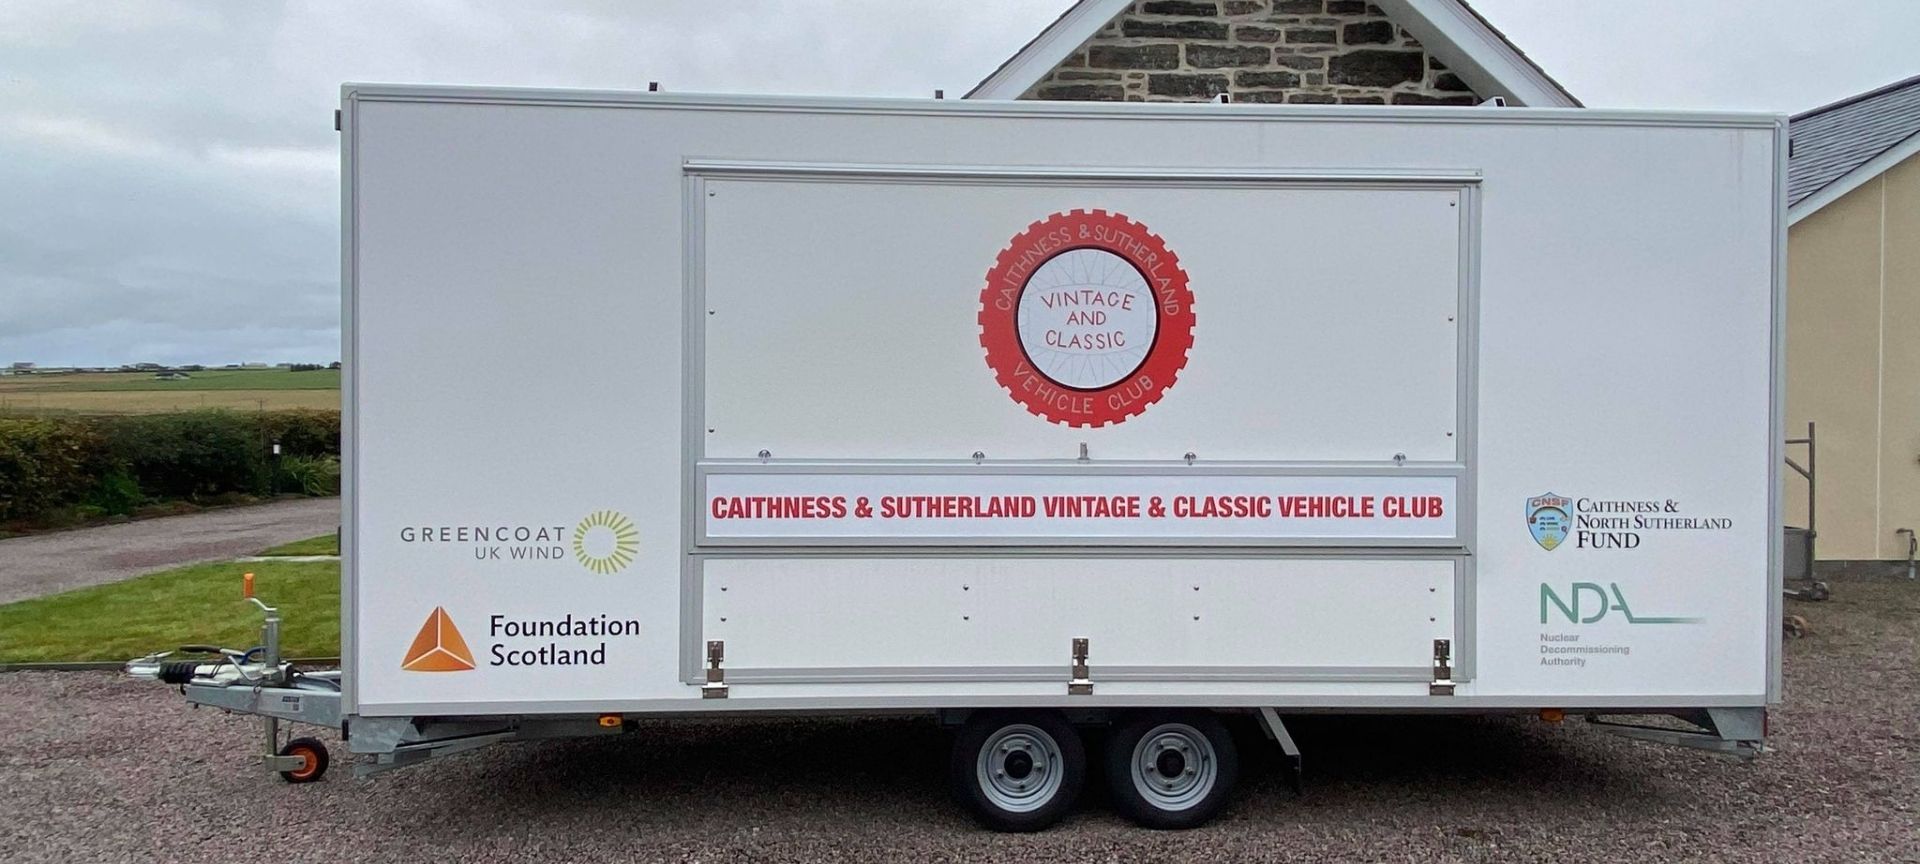 The Caithness and Sutherland Vintage and Classic Vehicle Club trailer with logo